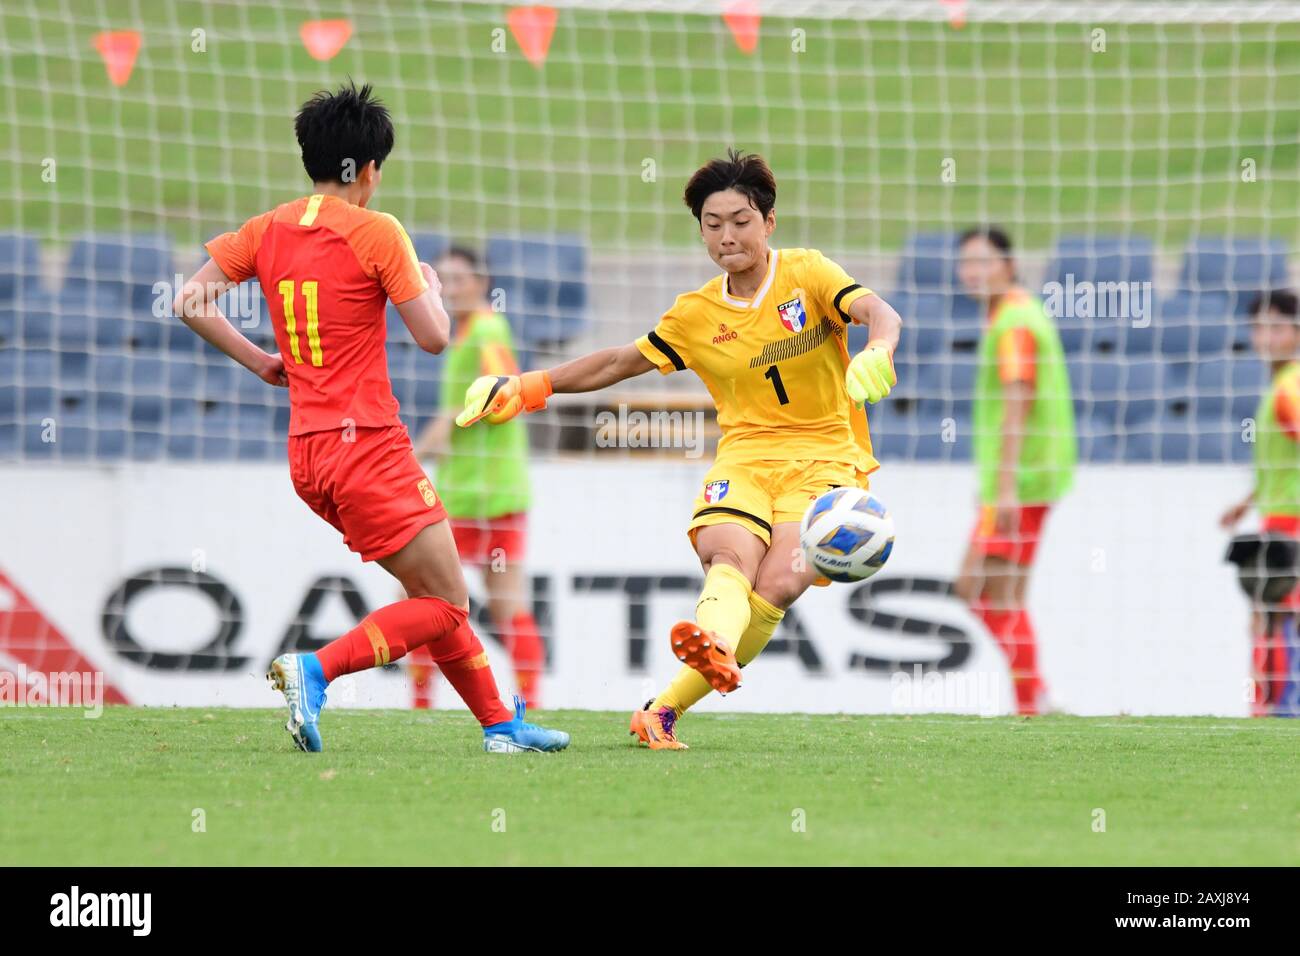 Tsai Ming-jung of Chinese Taipei seen in action during the 2020 AFC Women's Olympic Qualifying Tournament match between China and Chinese Taipei at Campbelltown Sports Stadium in Leumeah.(Final score; China 5:0 Chinese Taipei). Stock Photo